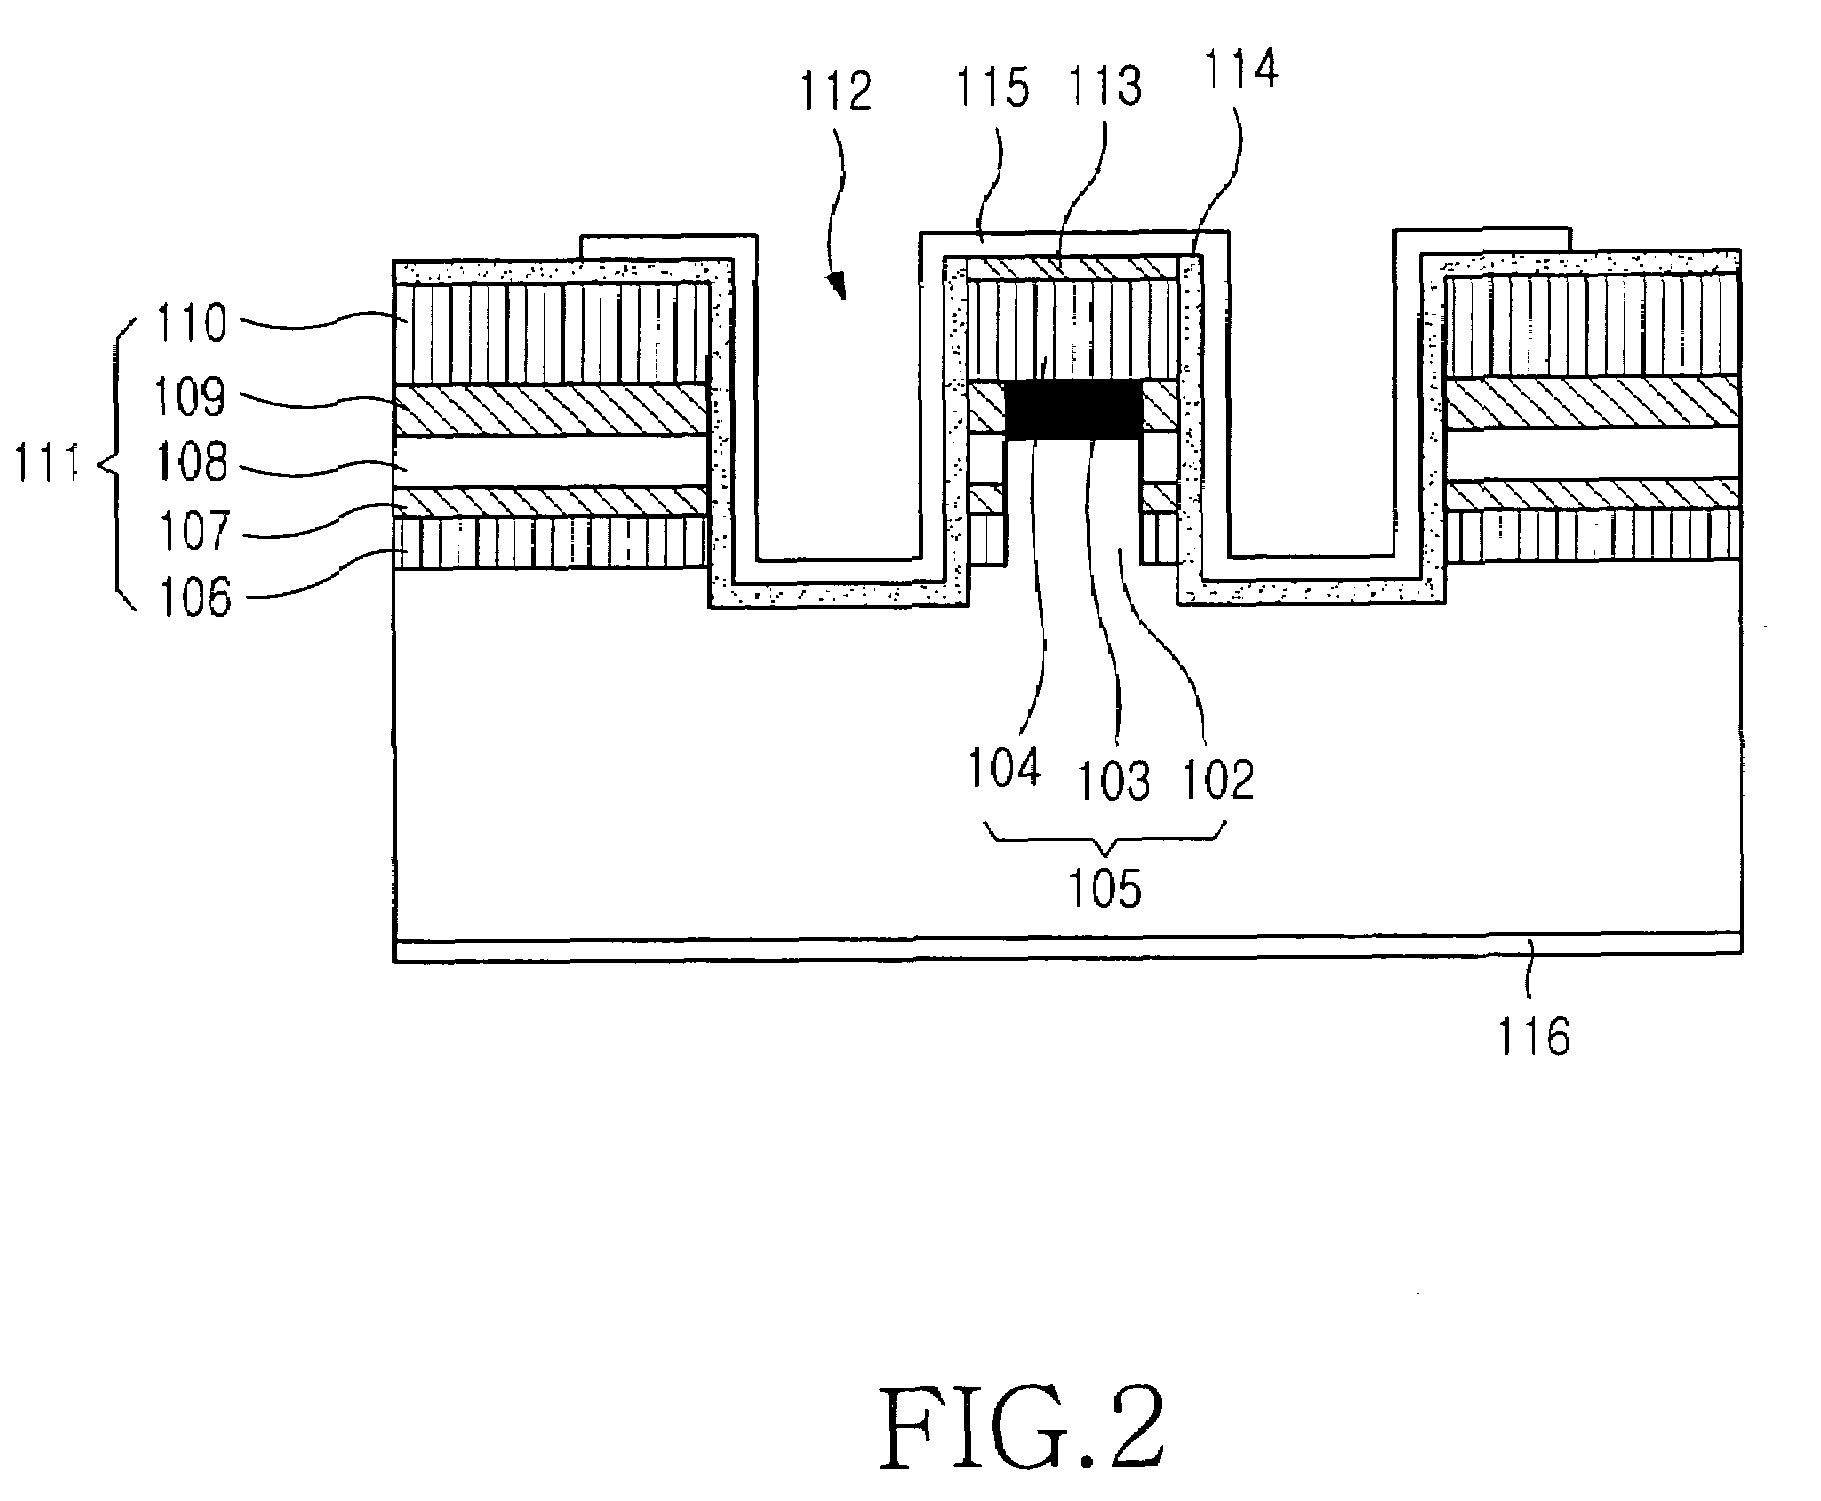 Reflective semiconductor optical amplifier